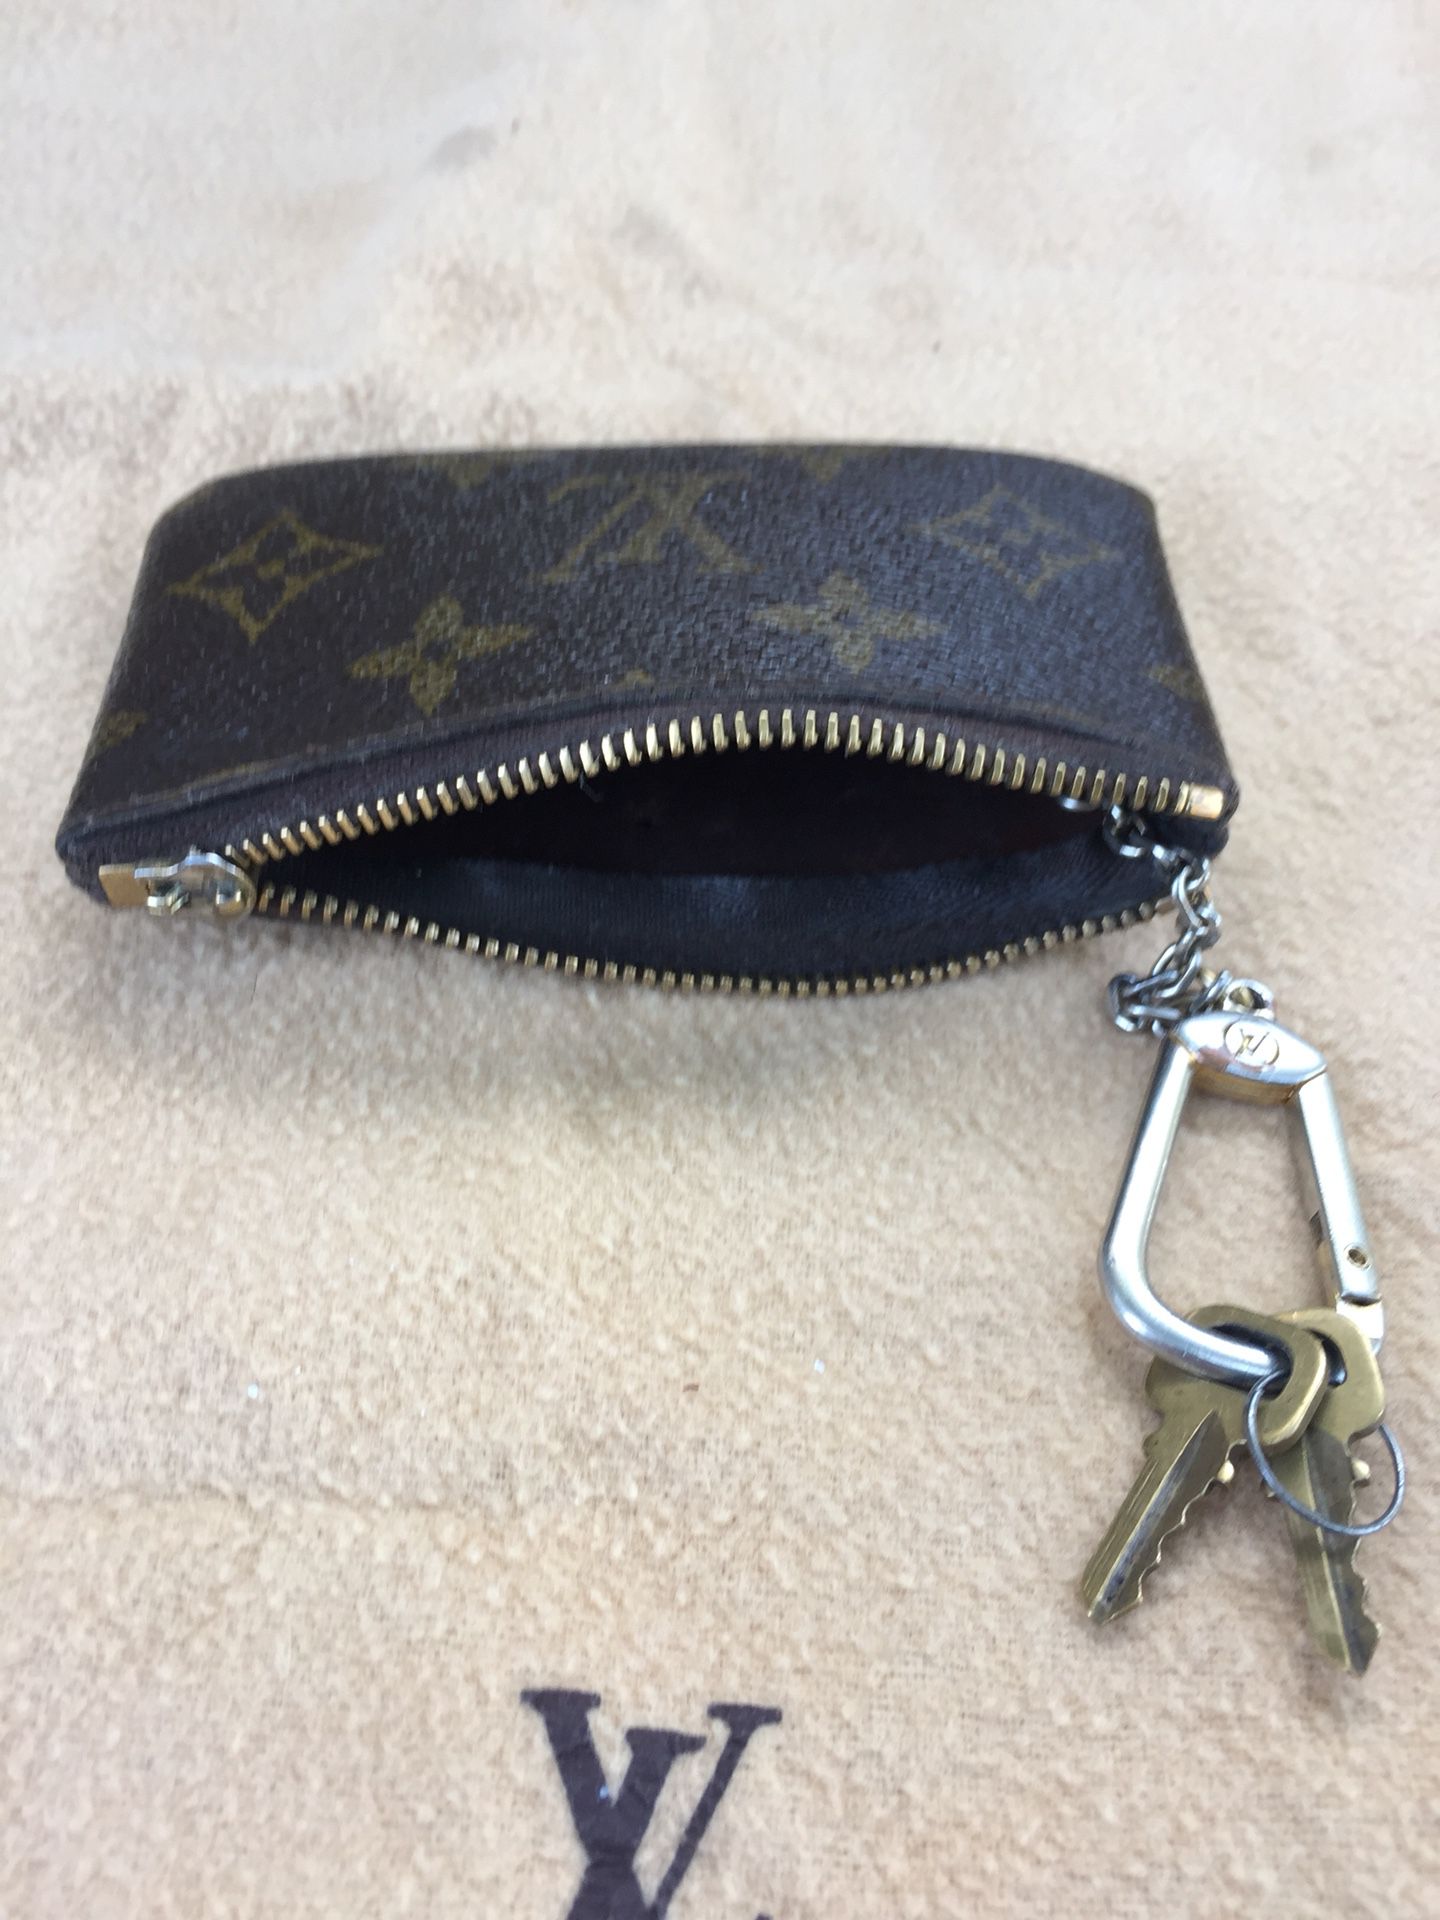 Authentic Vintage Louis Vuitton Coin Purse for Sale in Tulare, CA